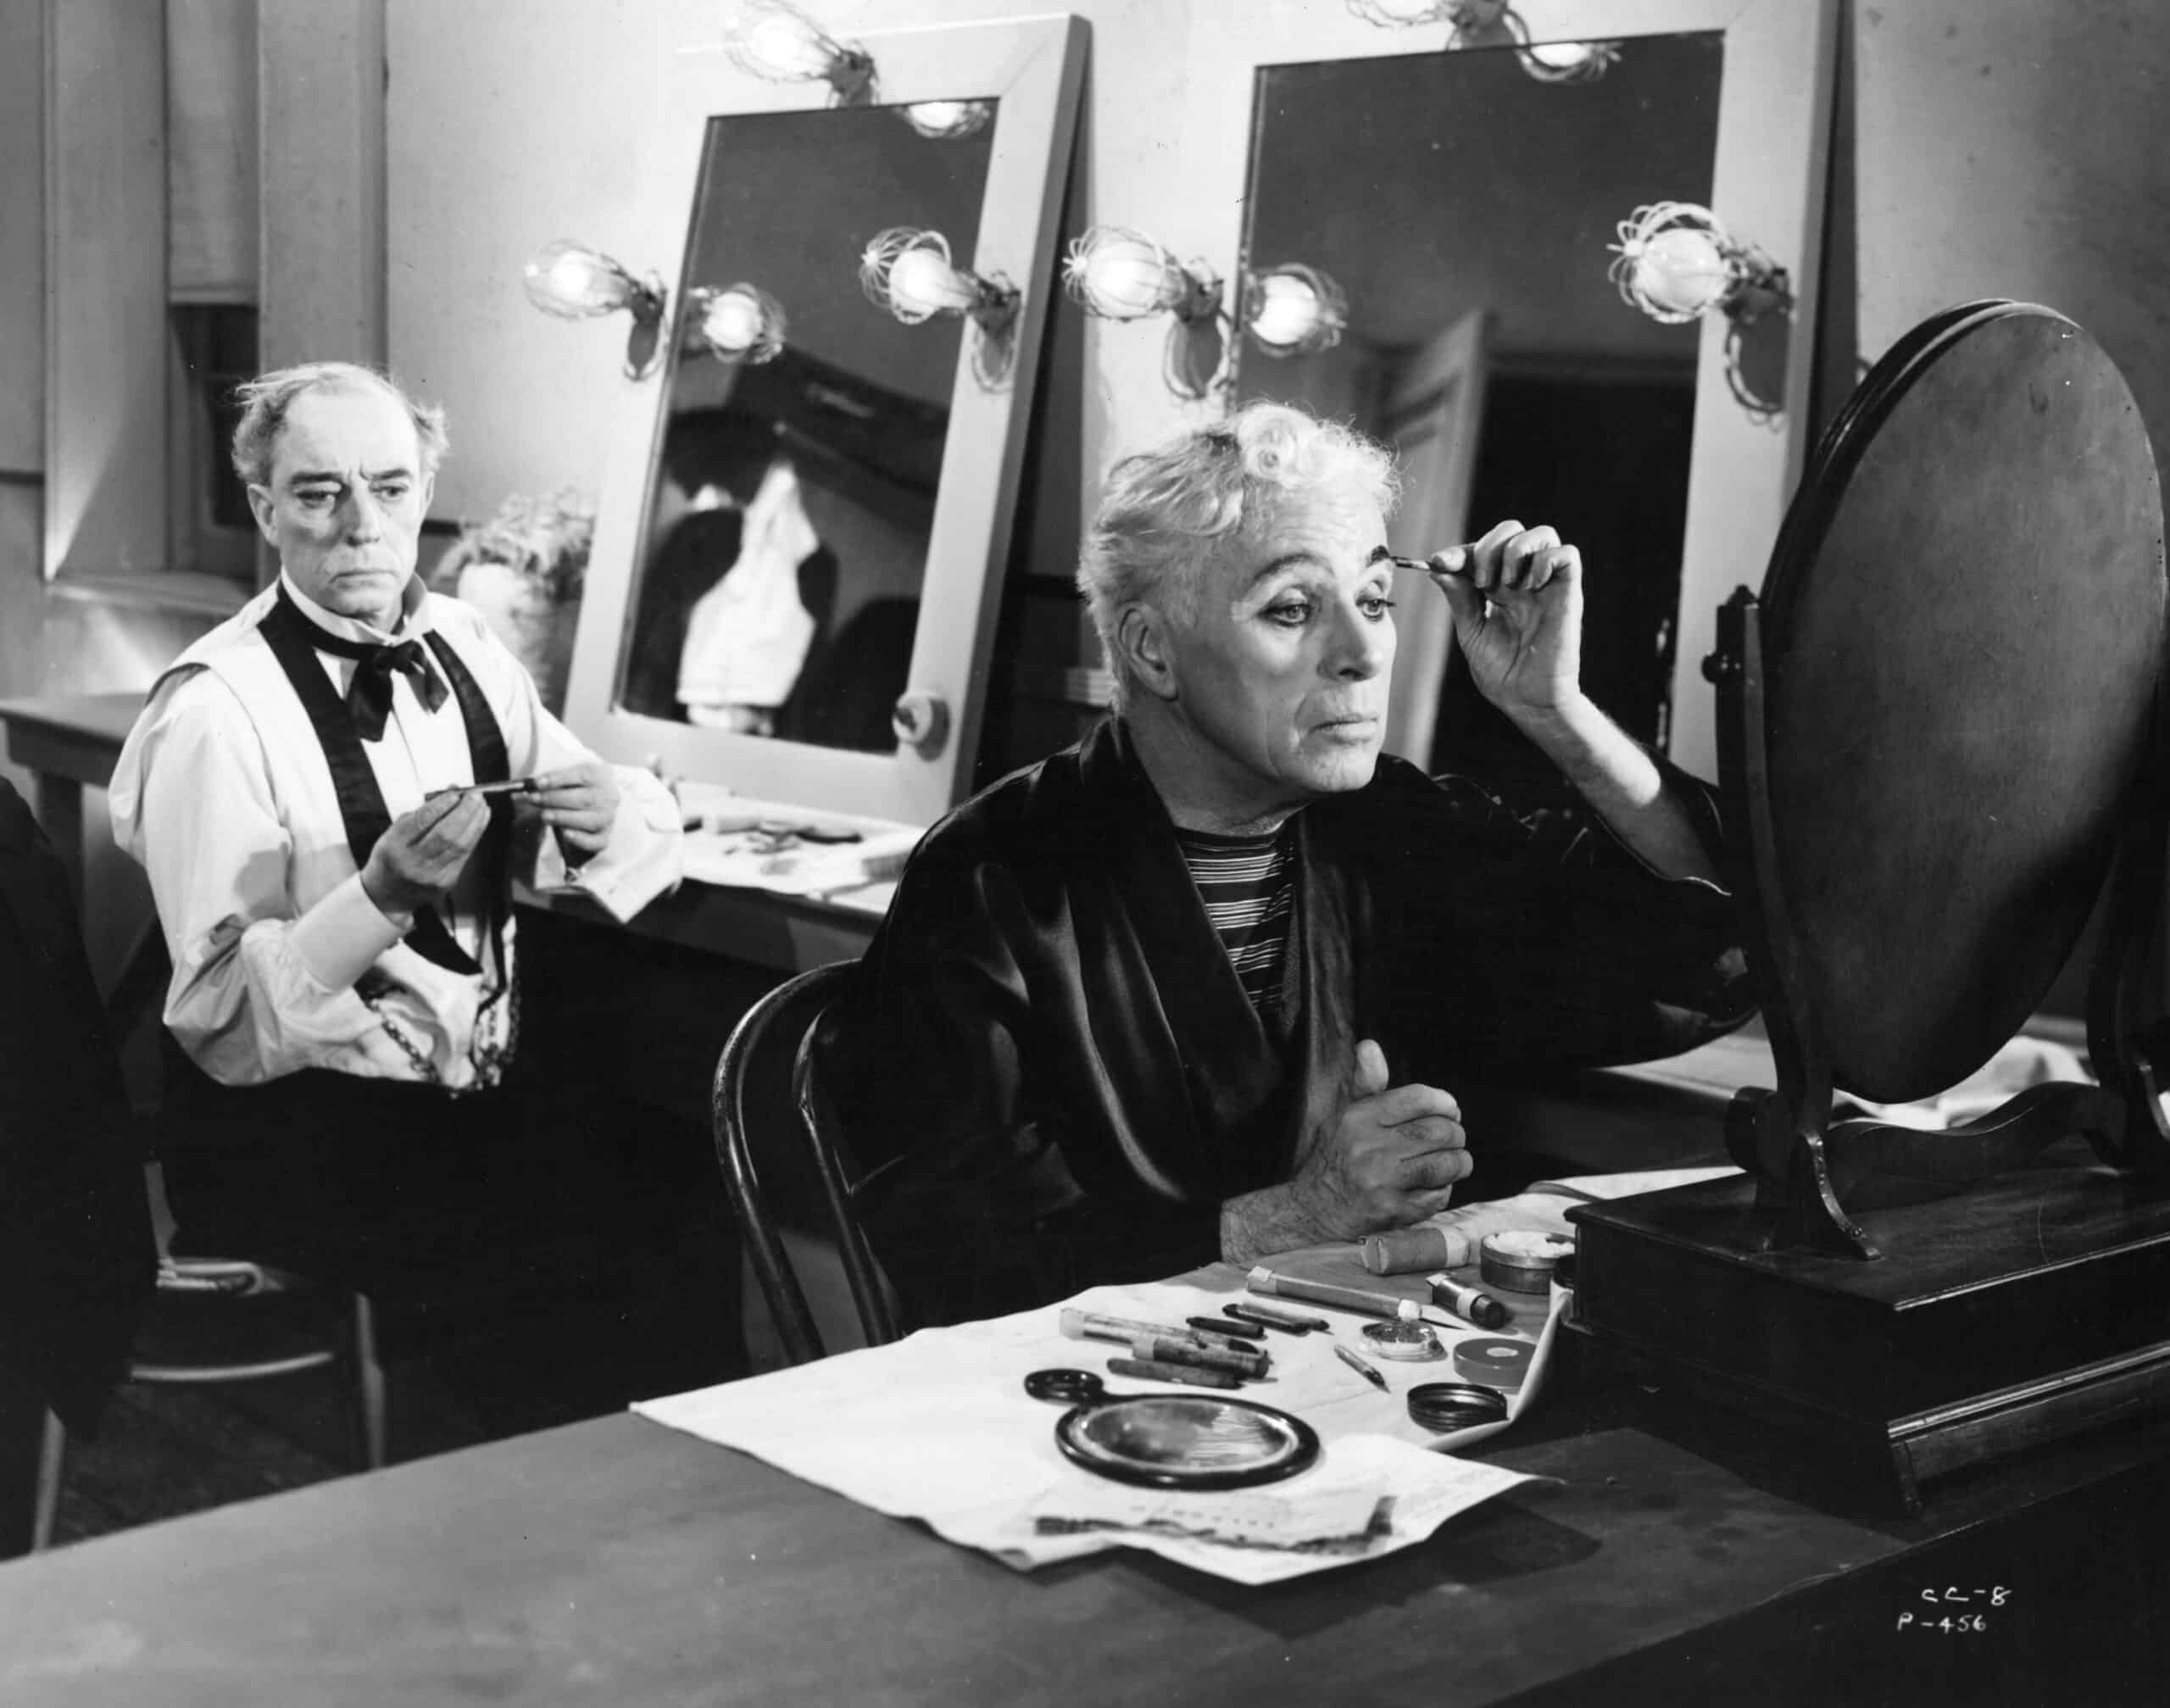 Keaton And Chaplin In Scene From 'Limelight'